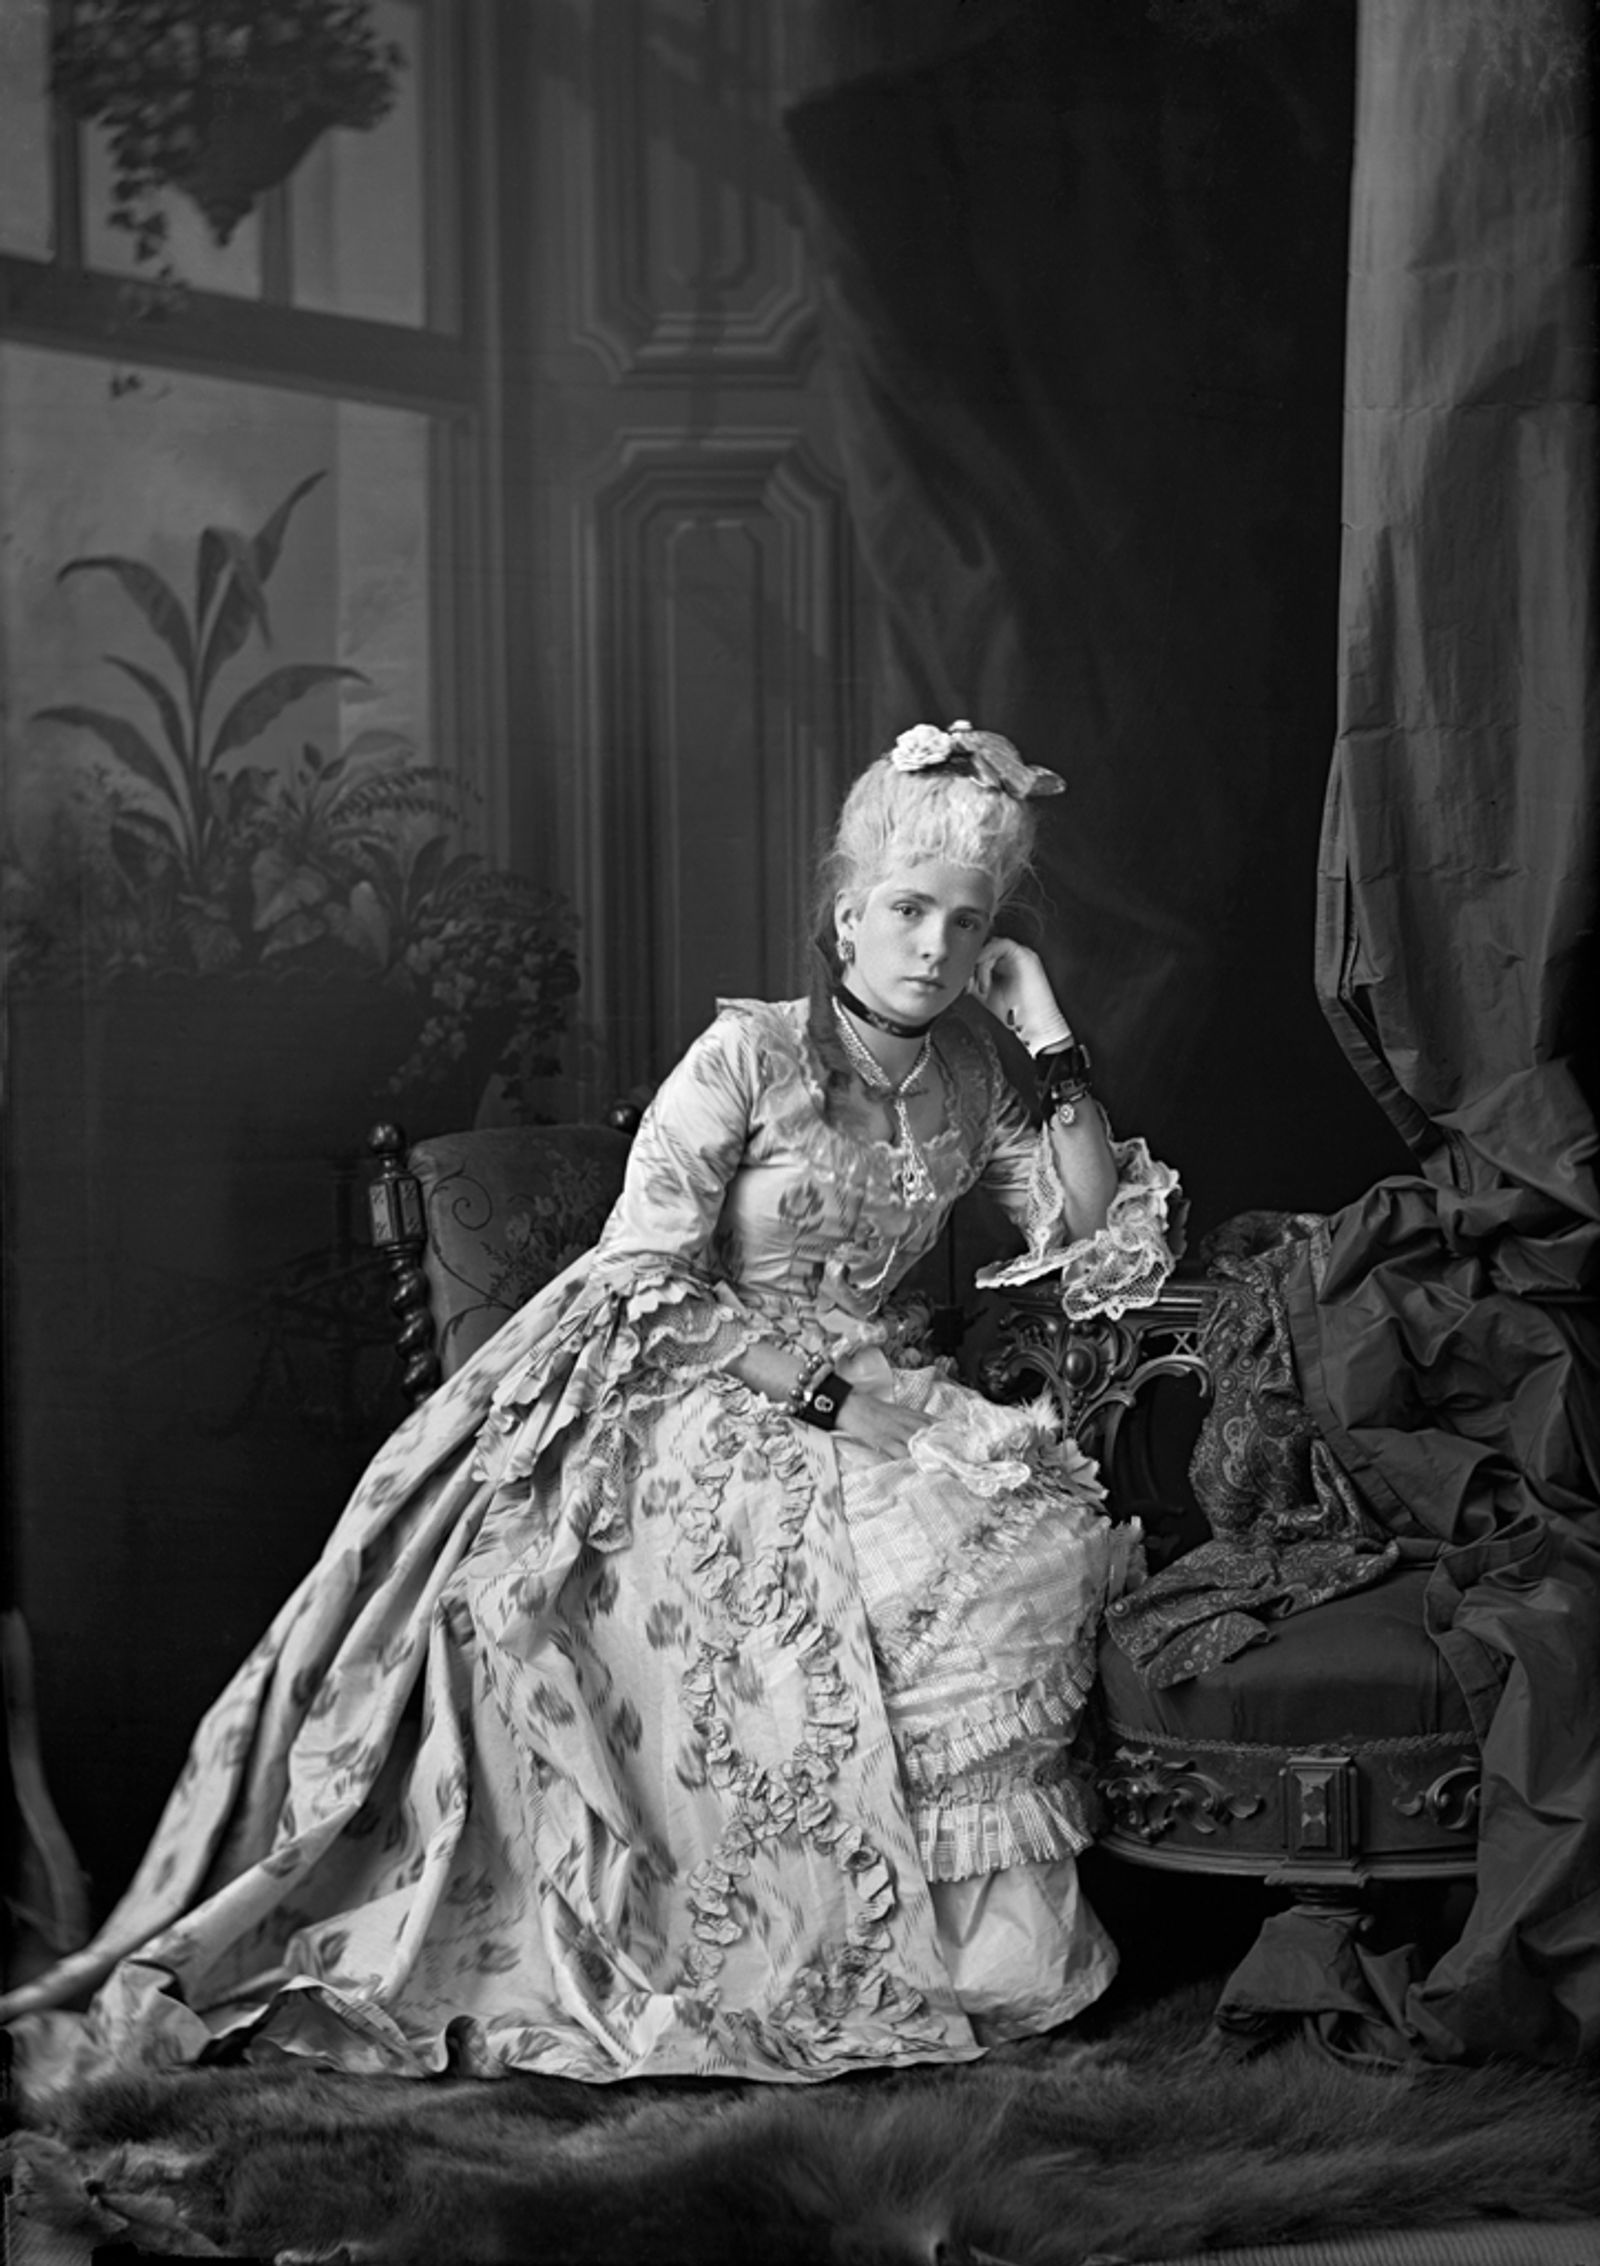 © Marisa Portolese - Miss M.F. Rolland in Costume, Montreal, QC, 1873, Wm. Notman & Son (A duo with Marie see above)